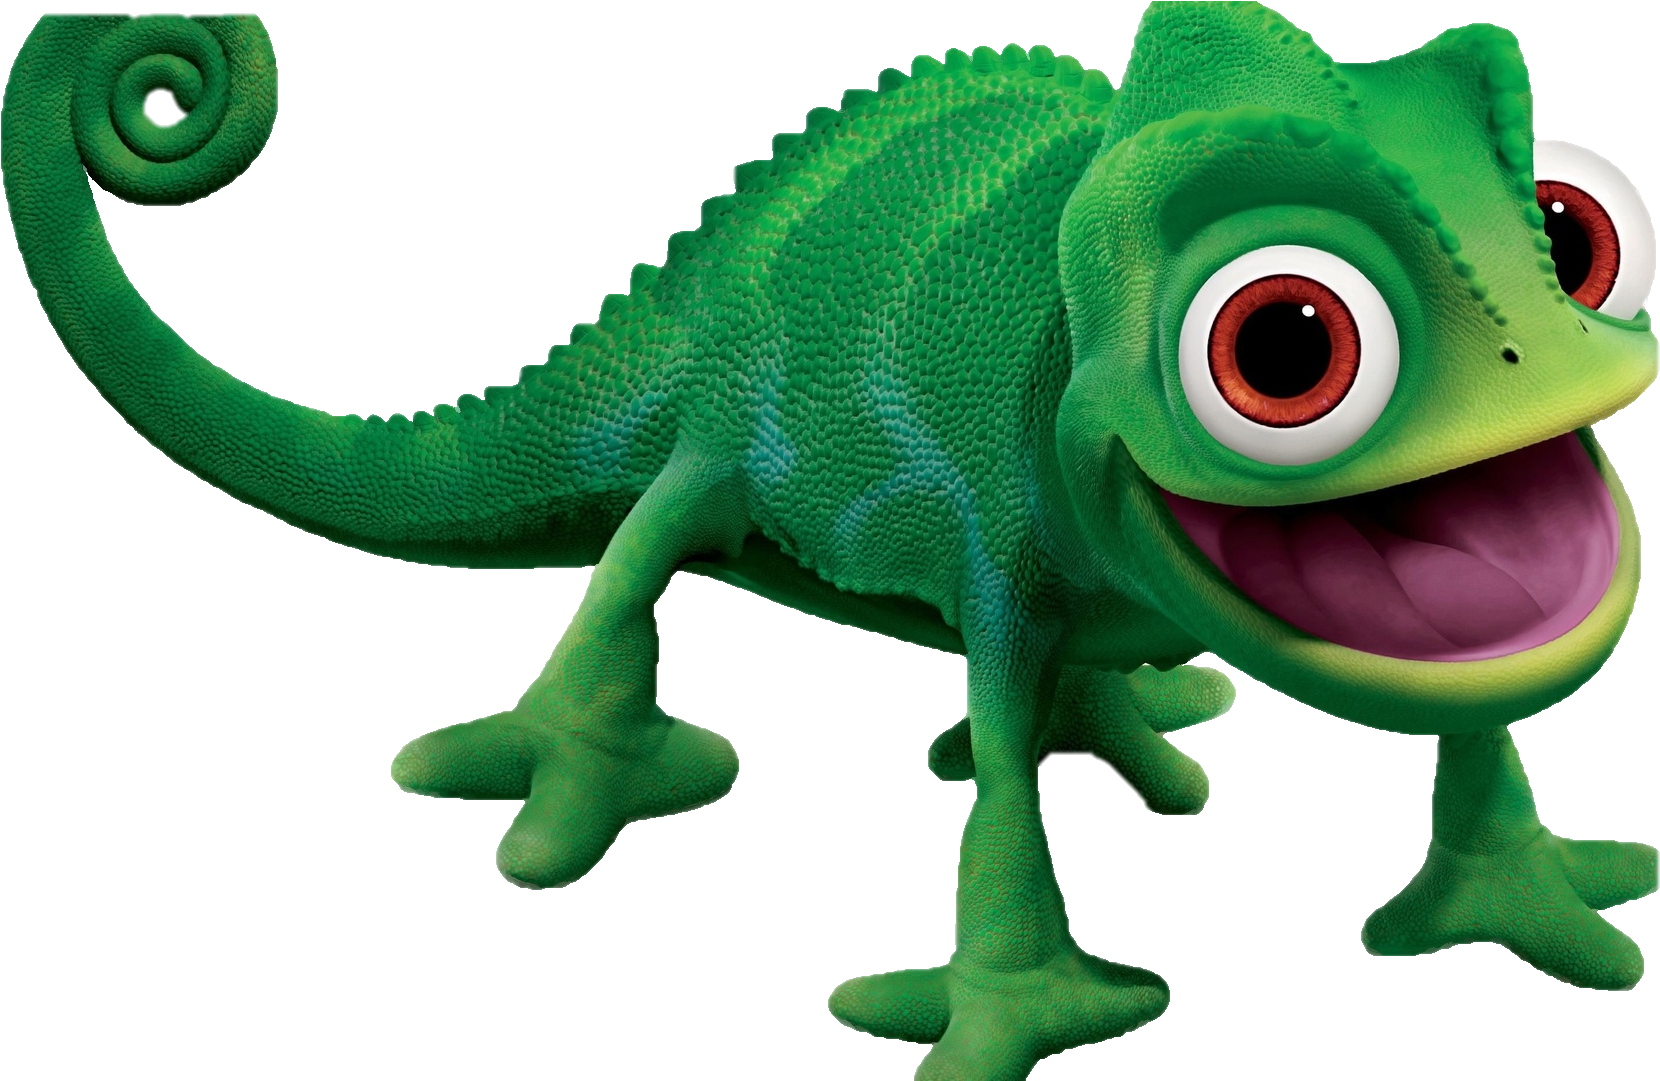 Pascal From Tangled (1920x1080)